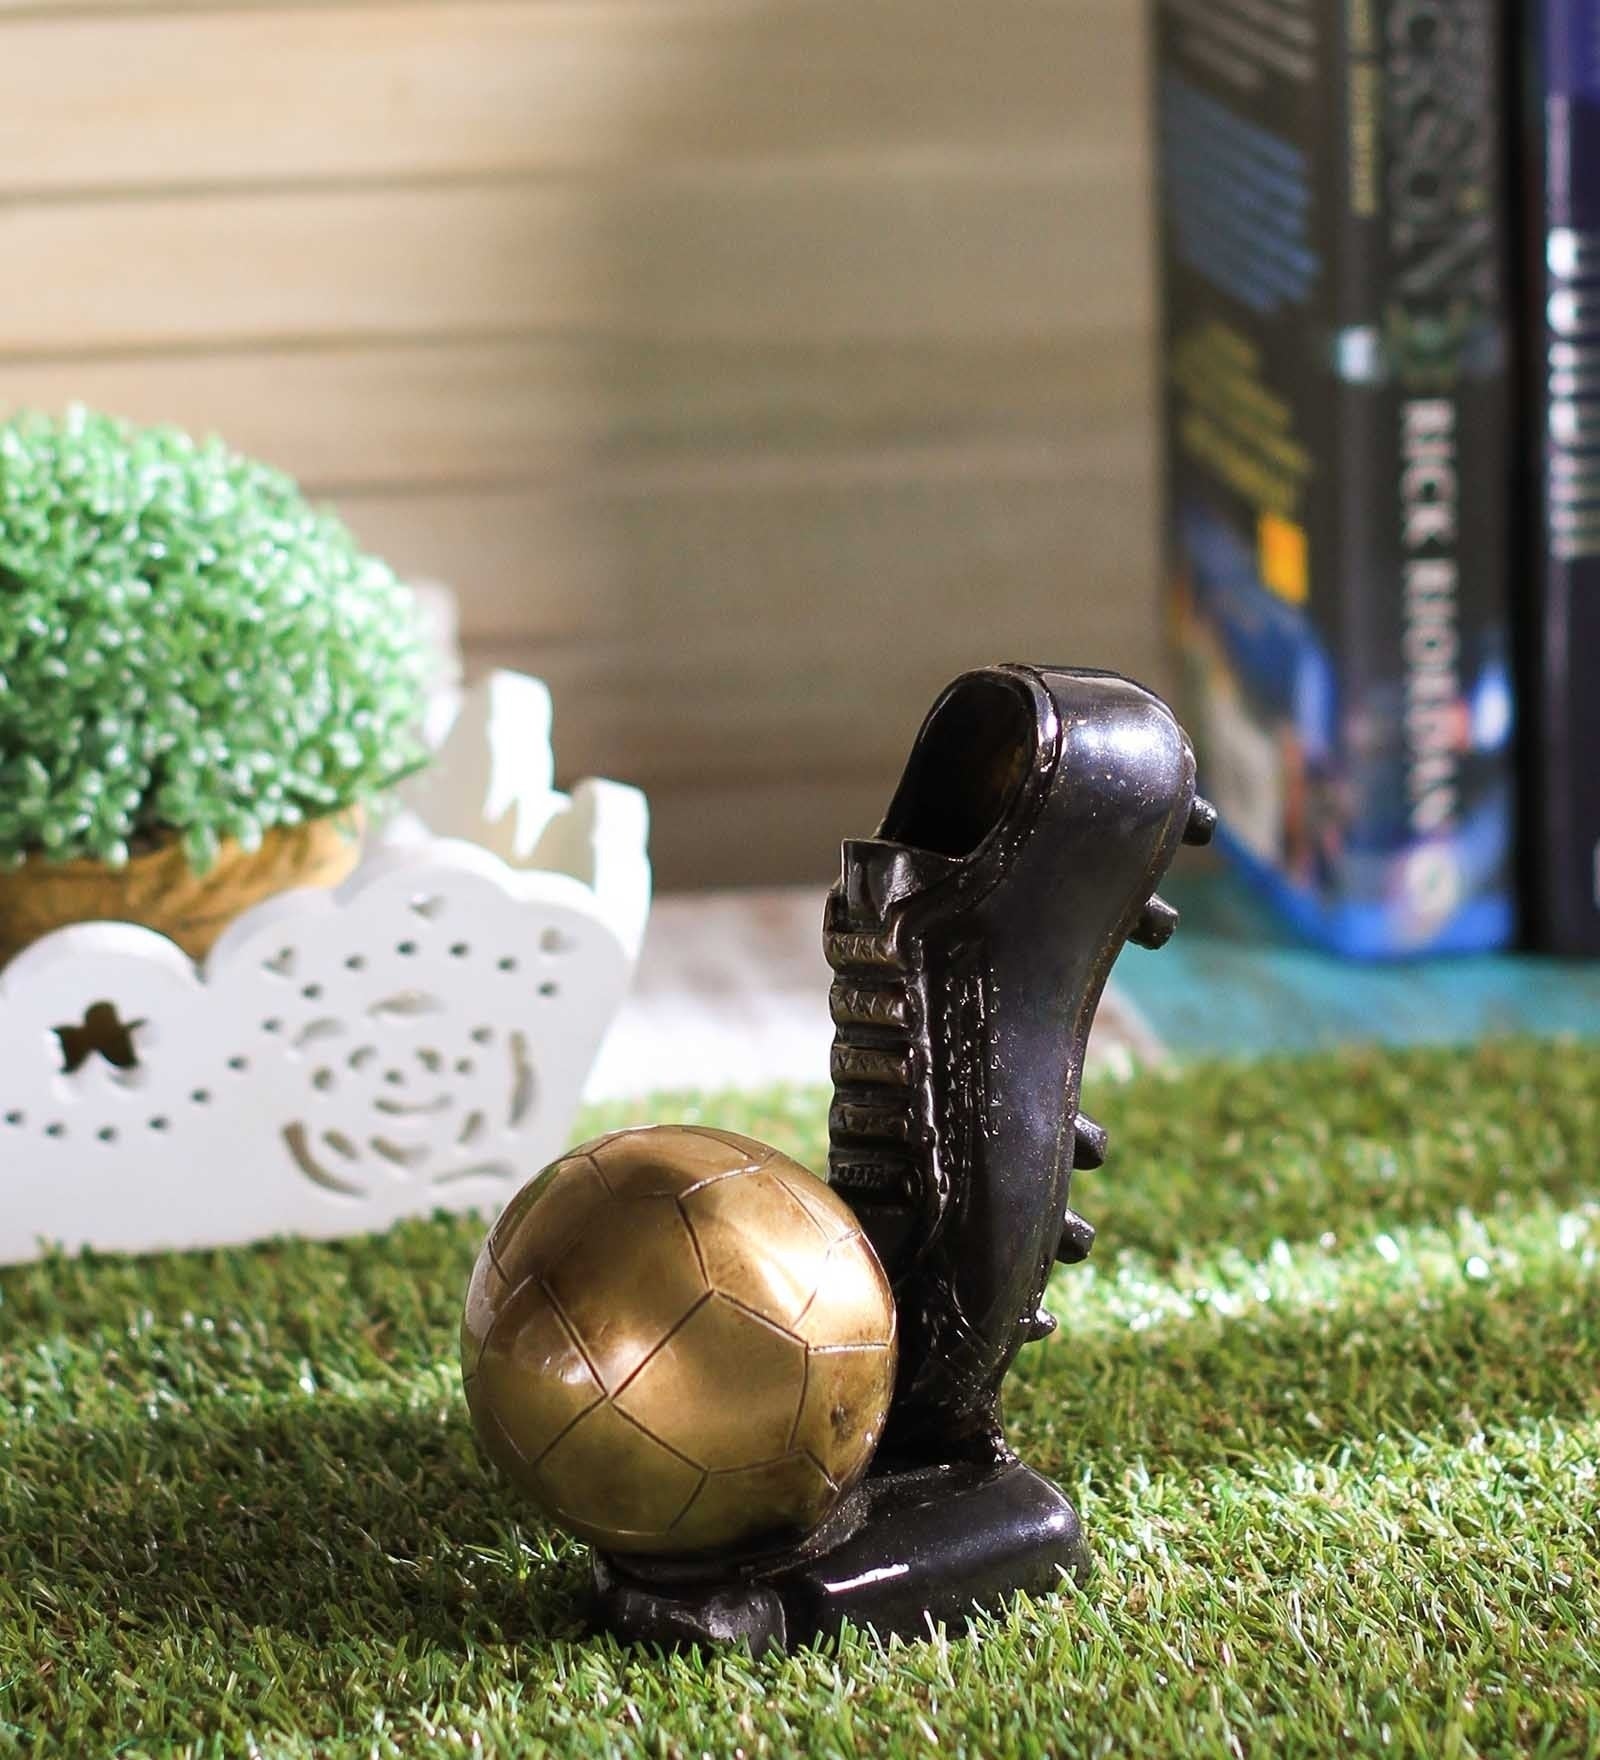 Decorative Soccer Ball and Shoe Brass Tableware 1